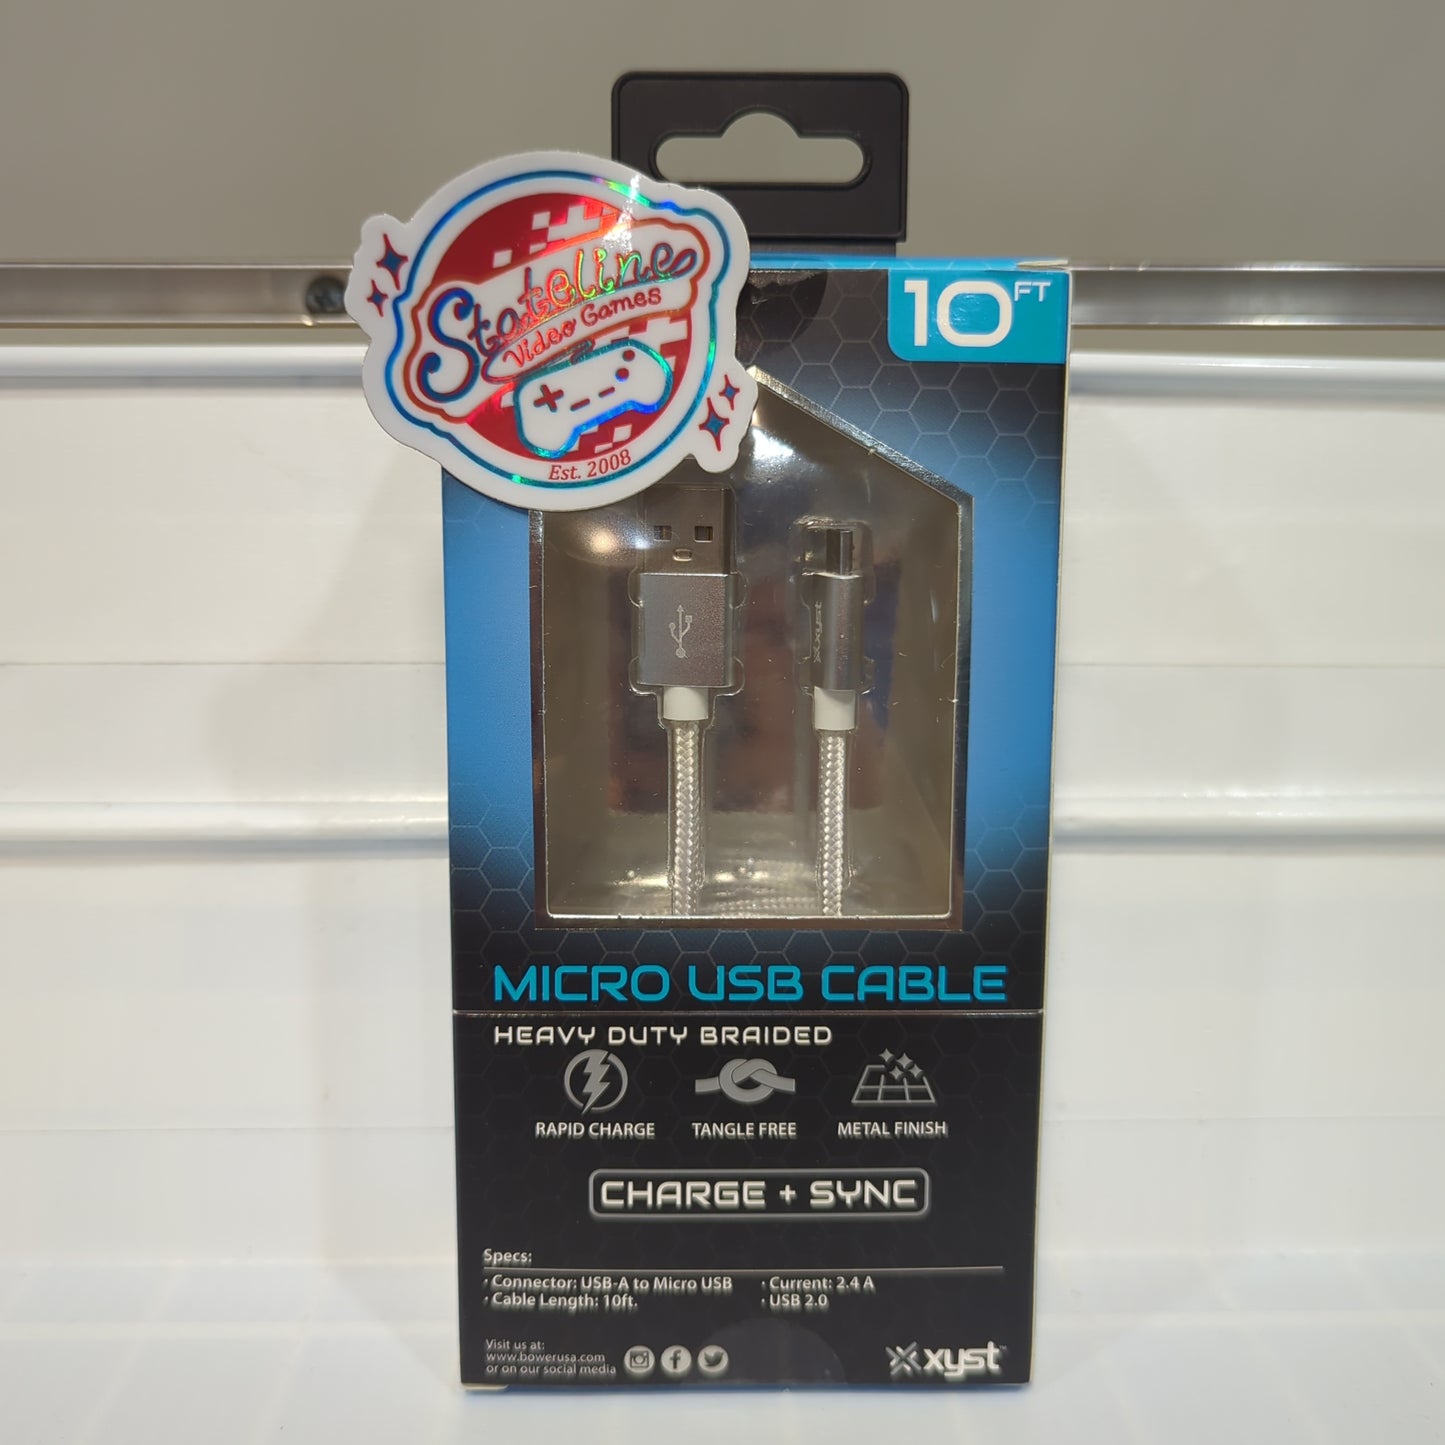 Micro USB Cable - MIsc